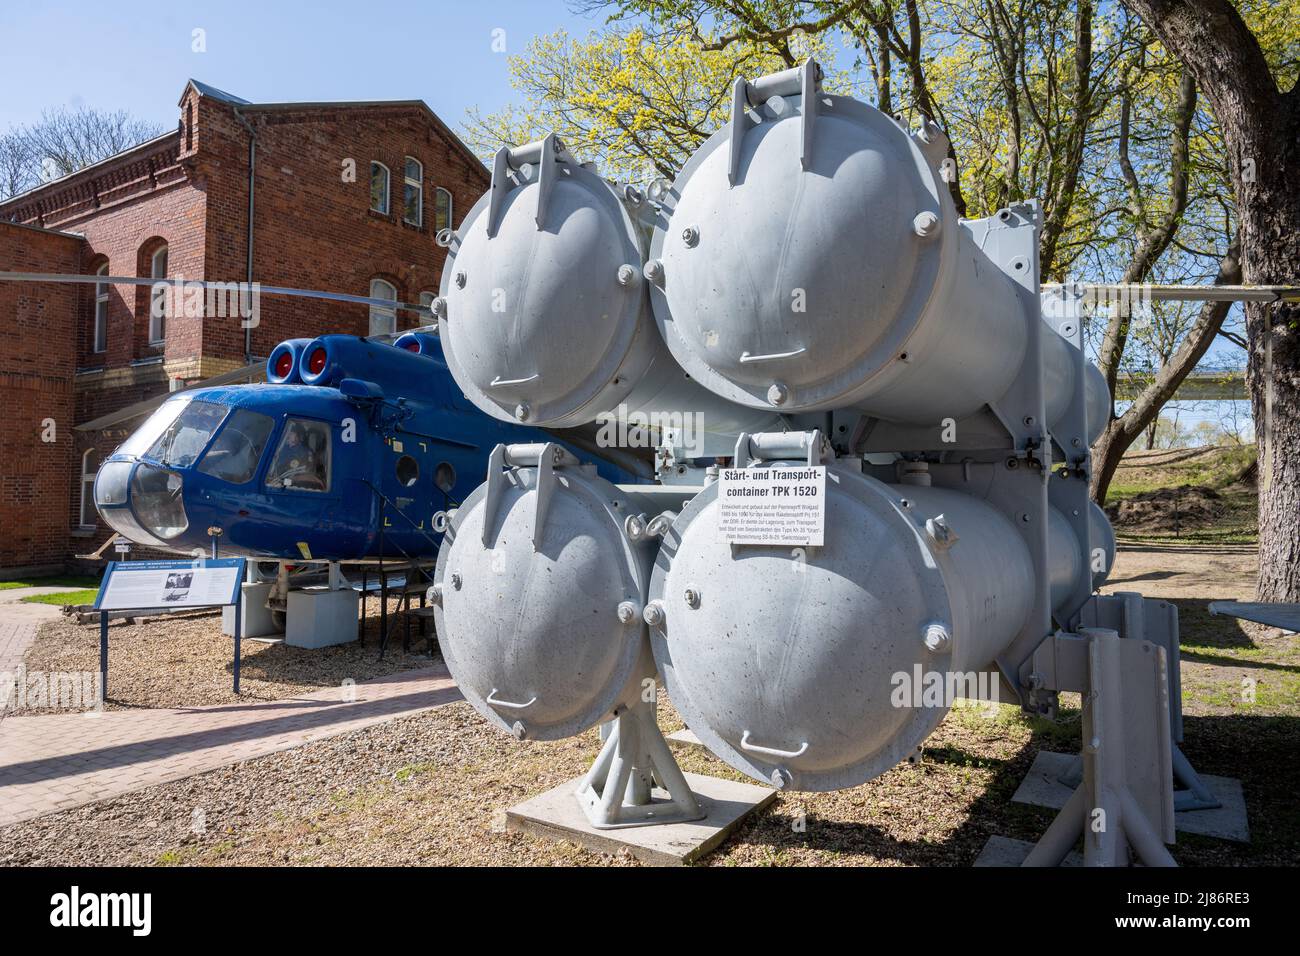 25 April 2022, Mecklenburg-Western Pomerania, Stralsund: On the grounds of the Dänholm Naval Museum stands a launch and transport container TPK 1520, which was used to store, transport and launch Ch-35 'Uranium' sea target missiles (NATO designation SS-N-25 'Switchblade'). On the island of Dänholm, between the mainland and Rügen, visitors can immerse themselves in naval history on Museum Day in a former barracks. The museum displays original objects from military seafaring such as uniforms and weapons, as well as photos, films and documents. Attractions also include a naval helicopter and a to Stock Photo